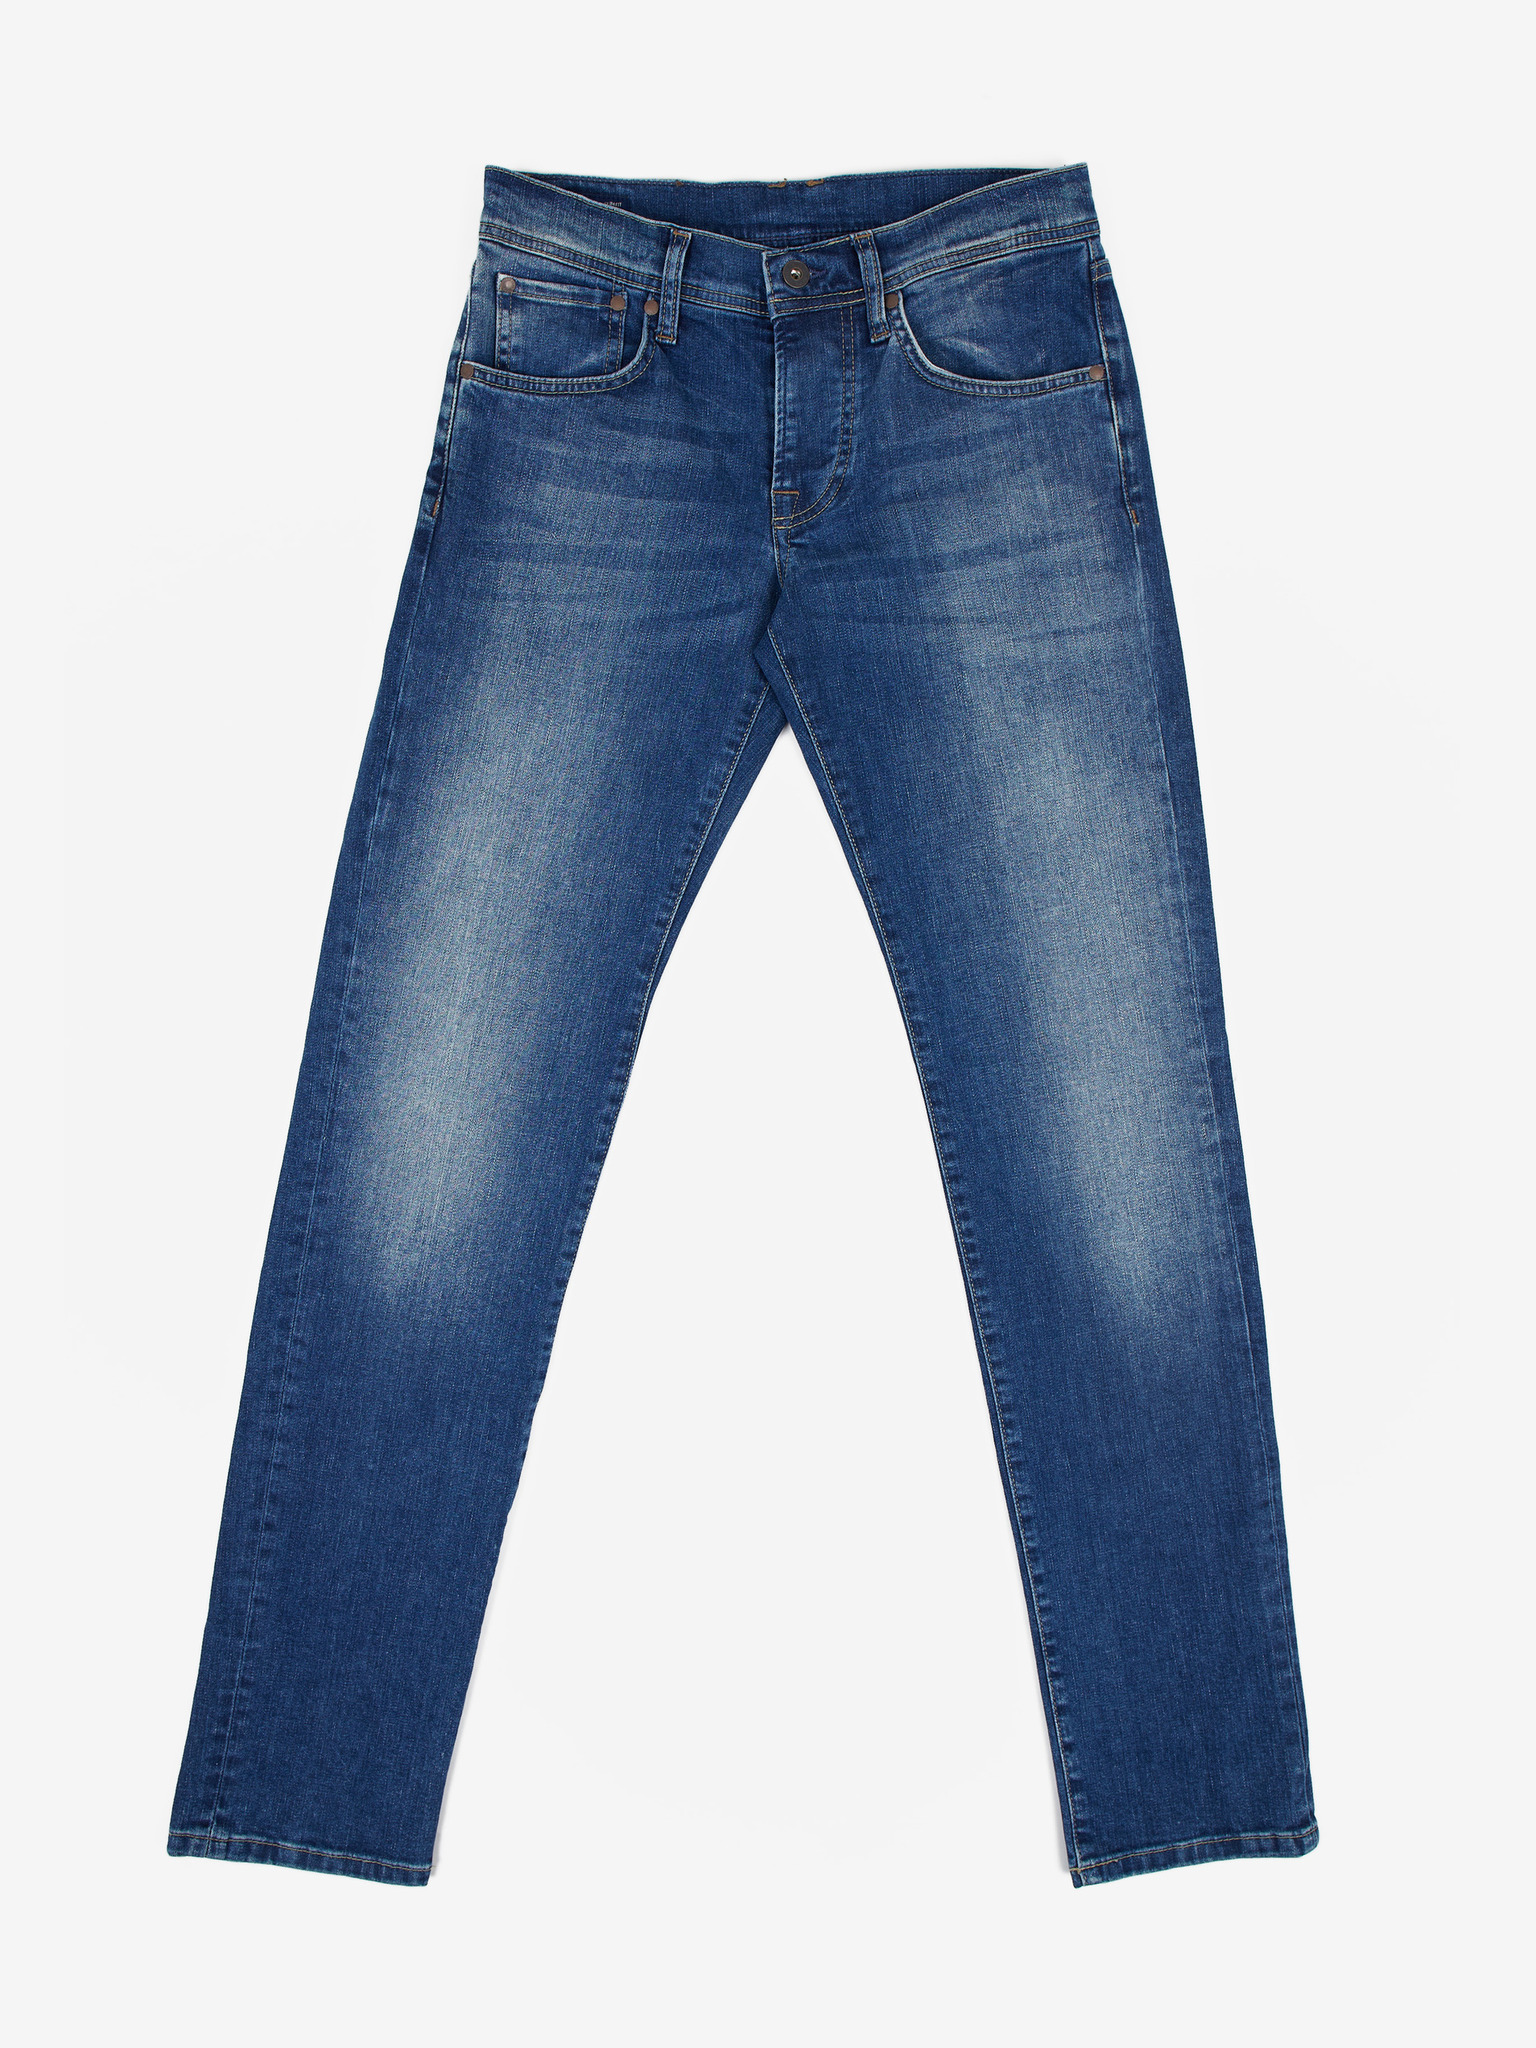 Cane Pepe - Jeans Jeans